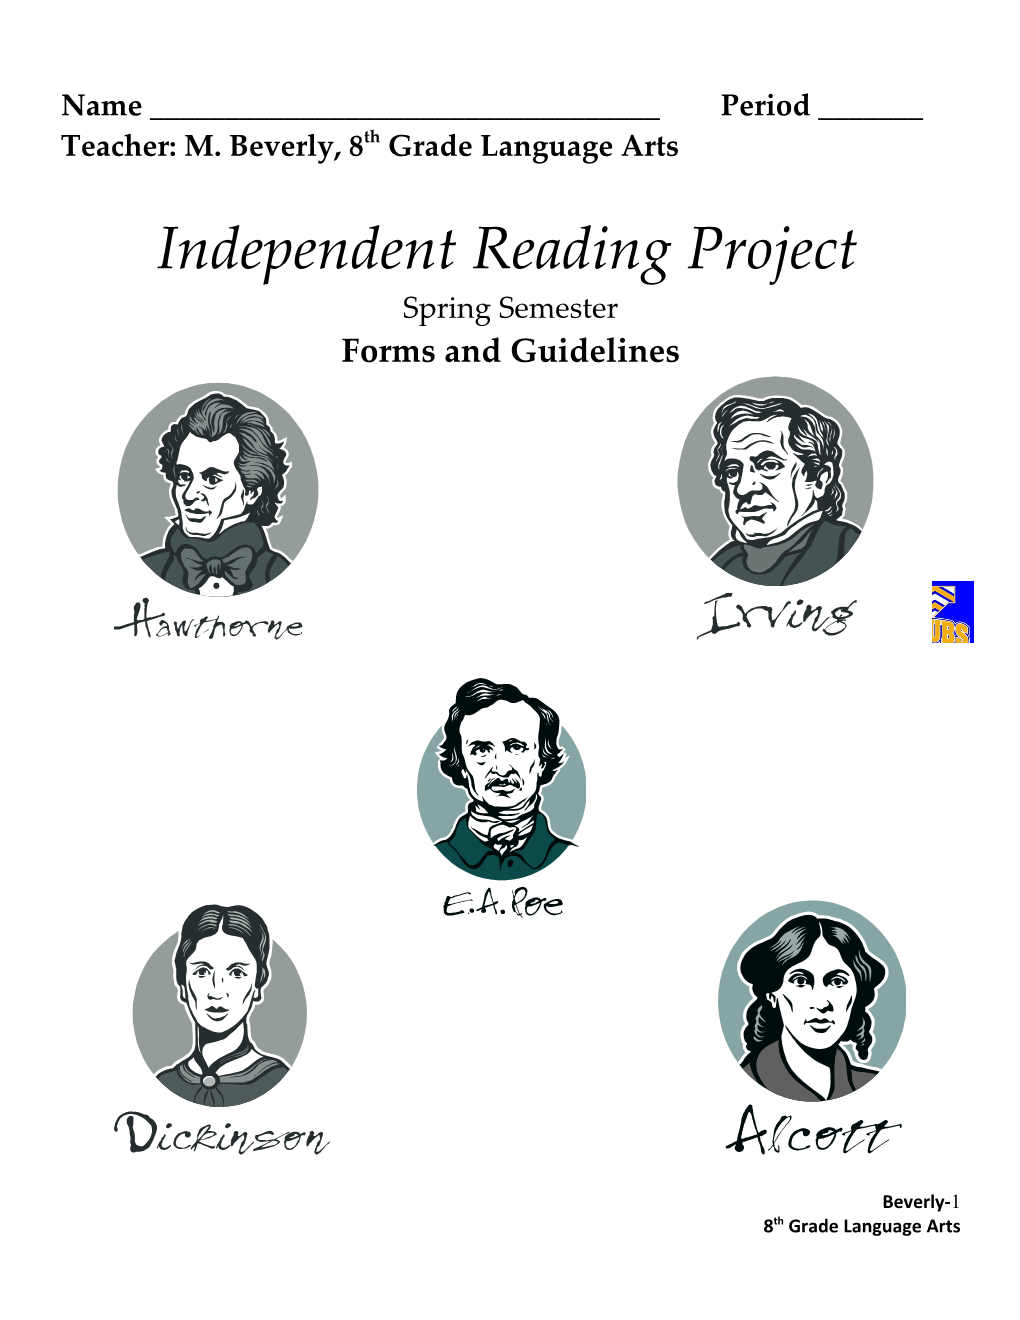 Independent Reading Guidelines